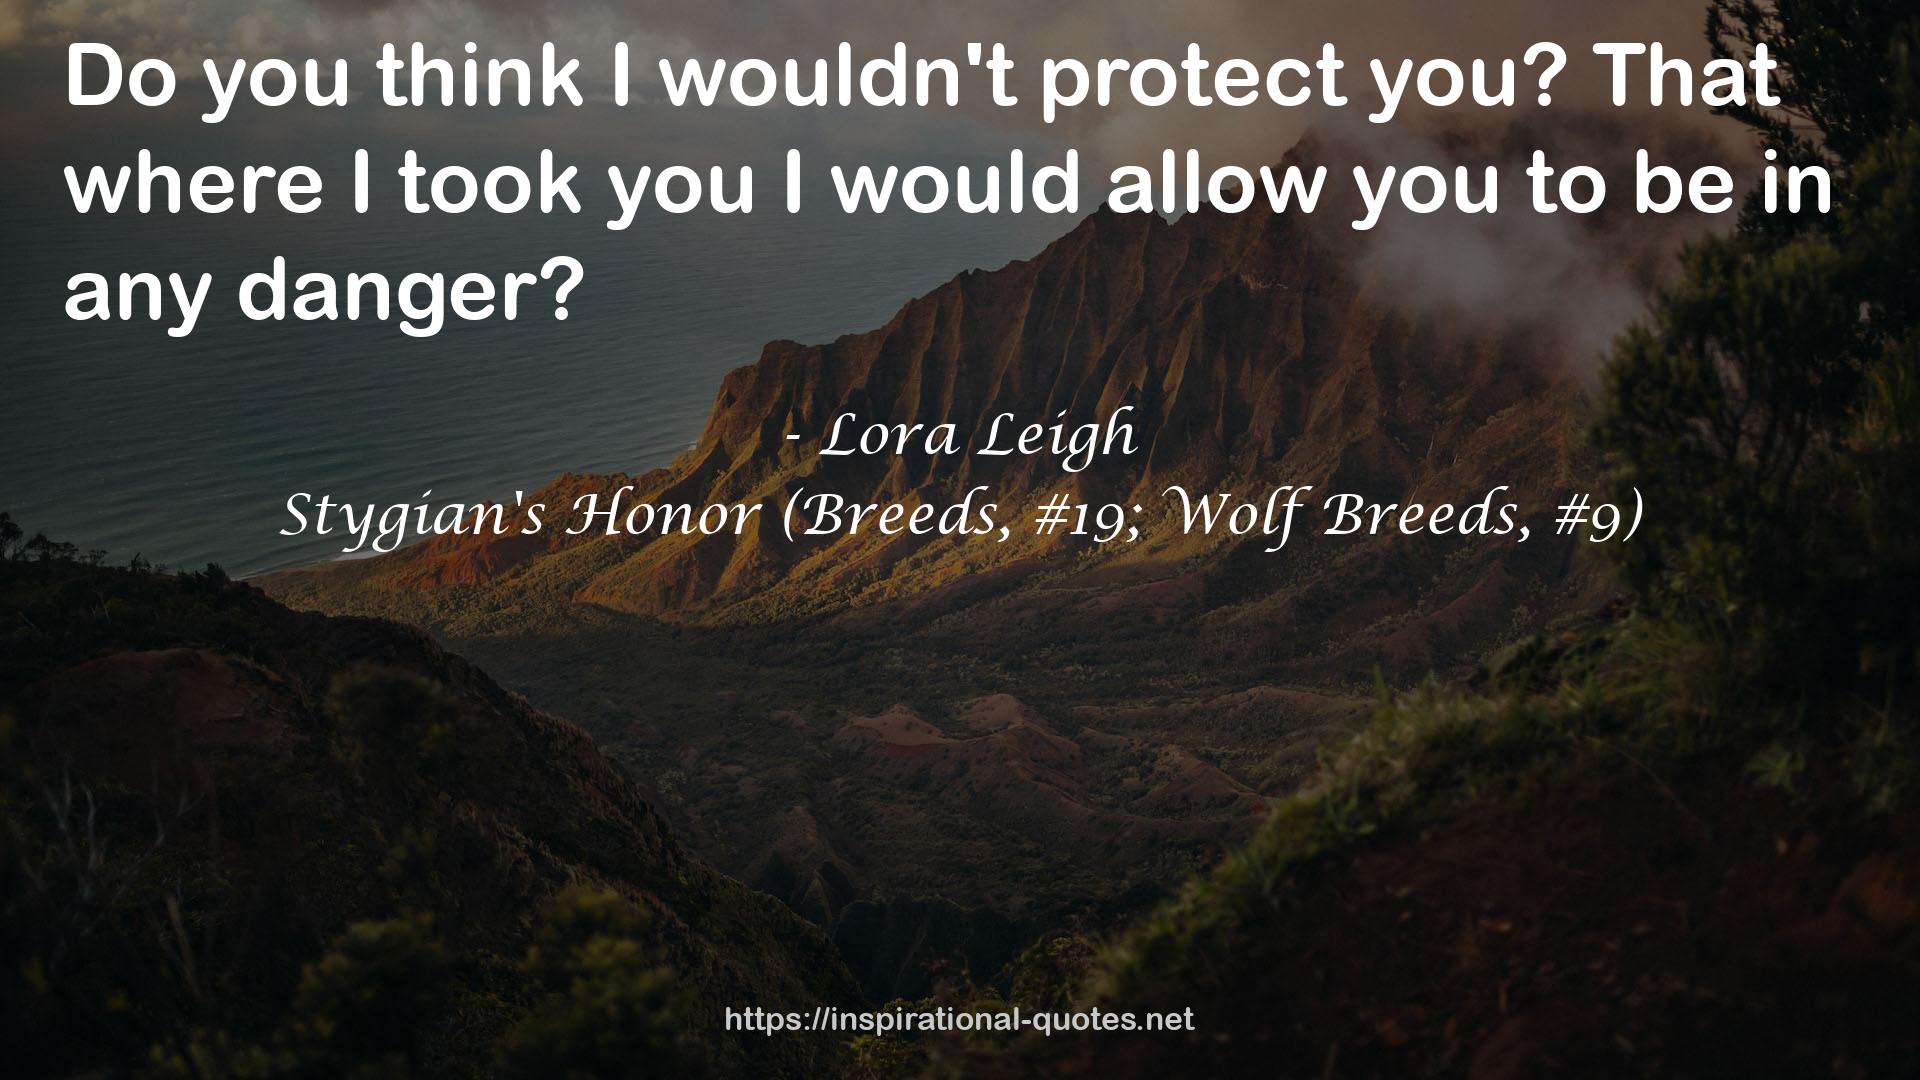 Stygian's Honor (Breeds, #19; Wolf Breeds, #9) QUOTES